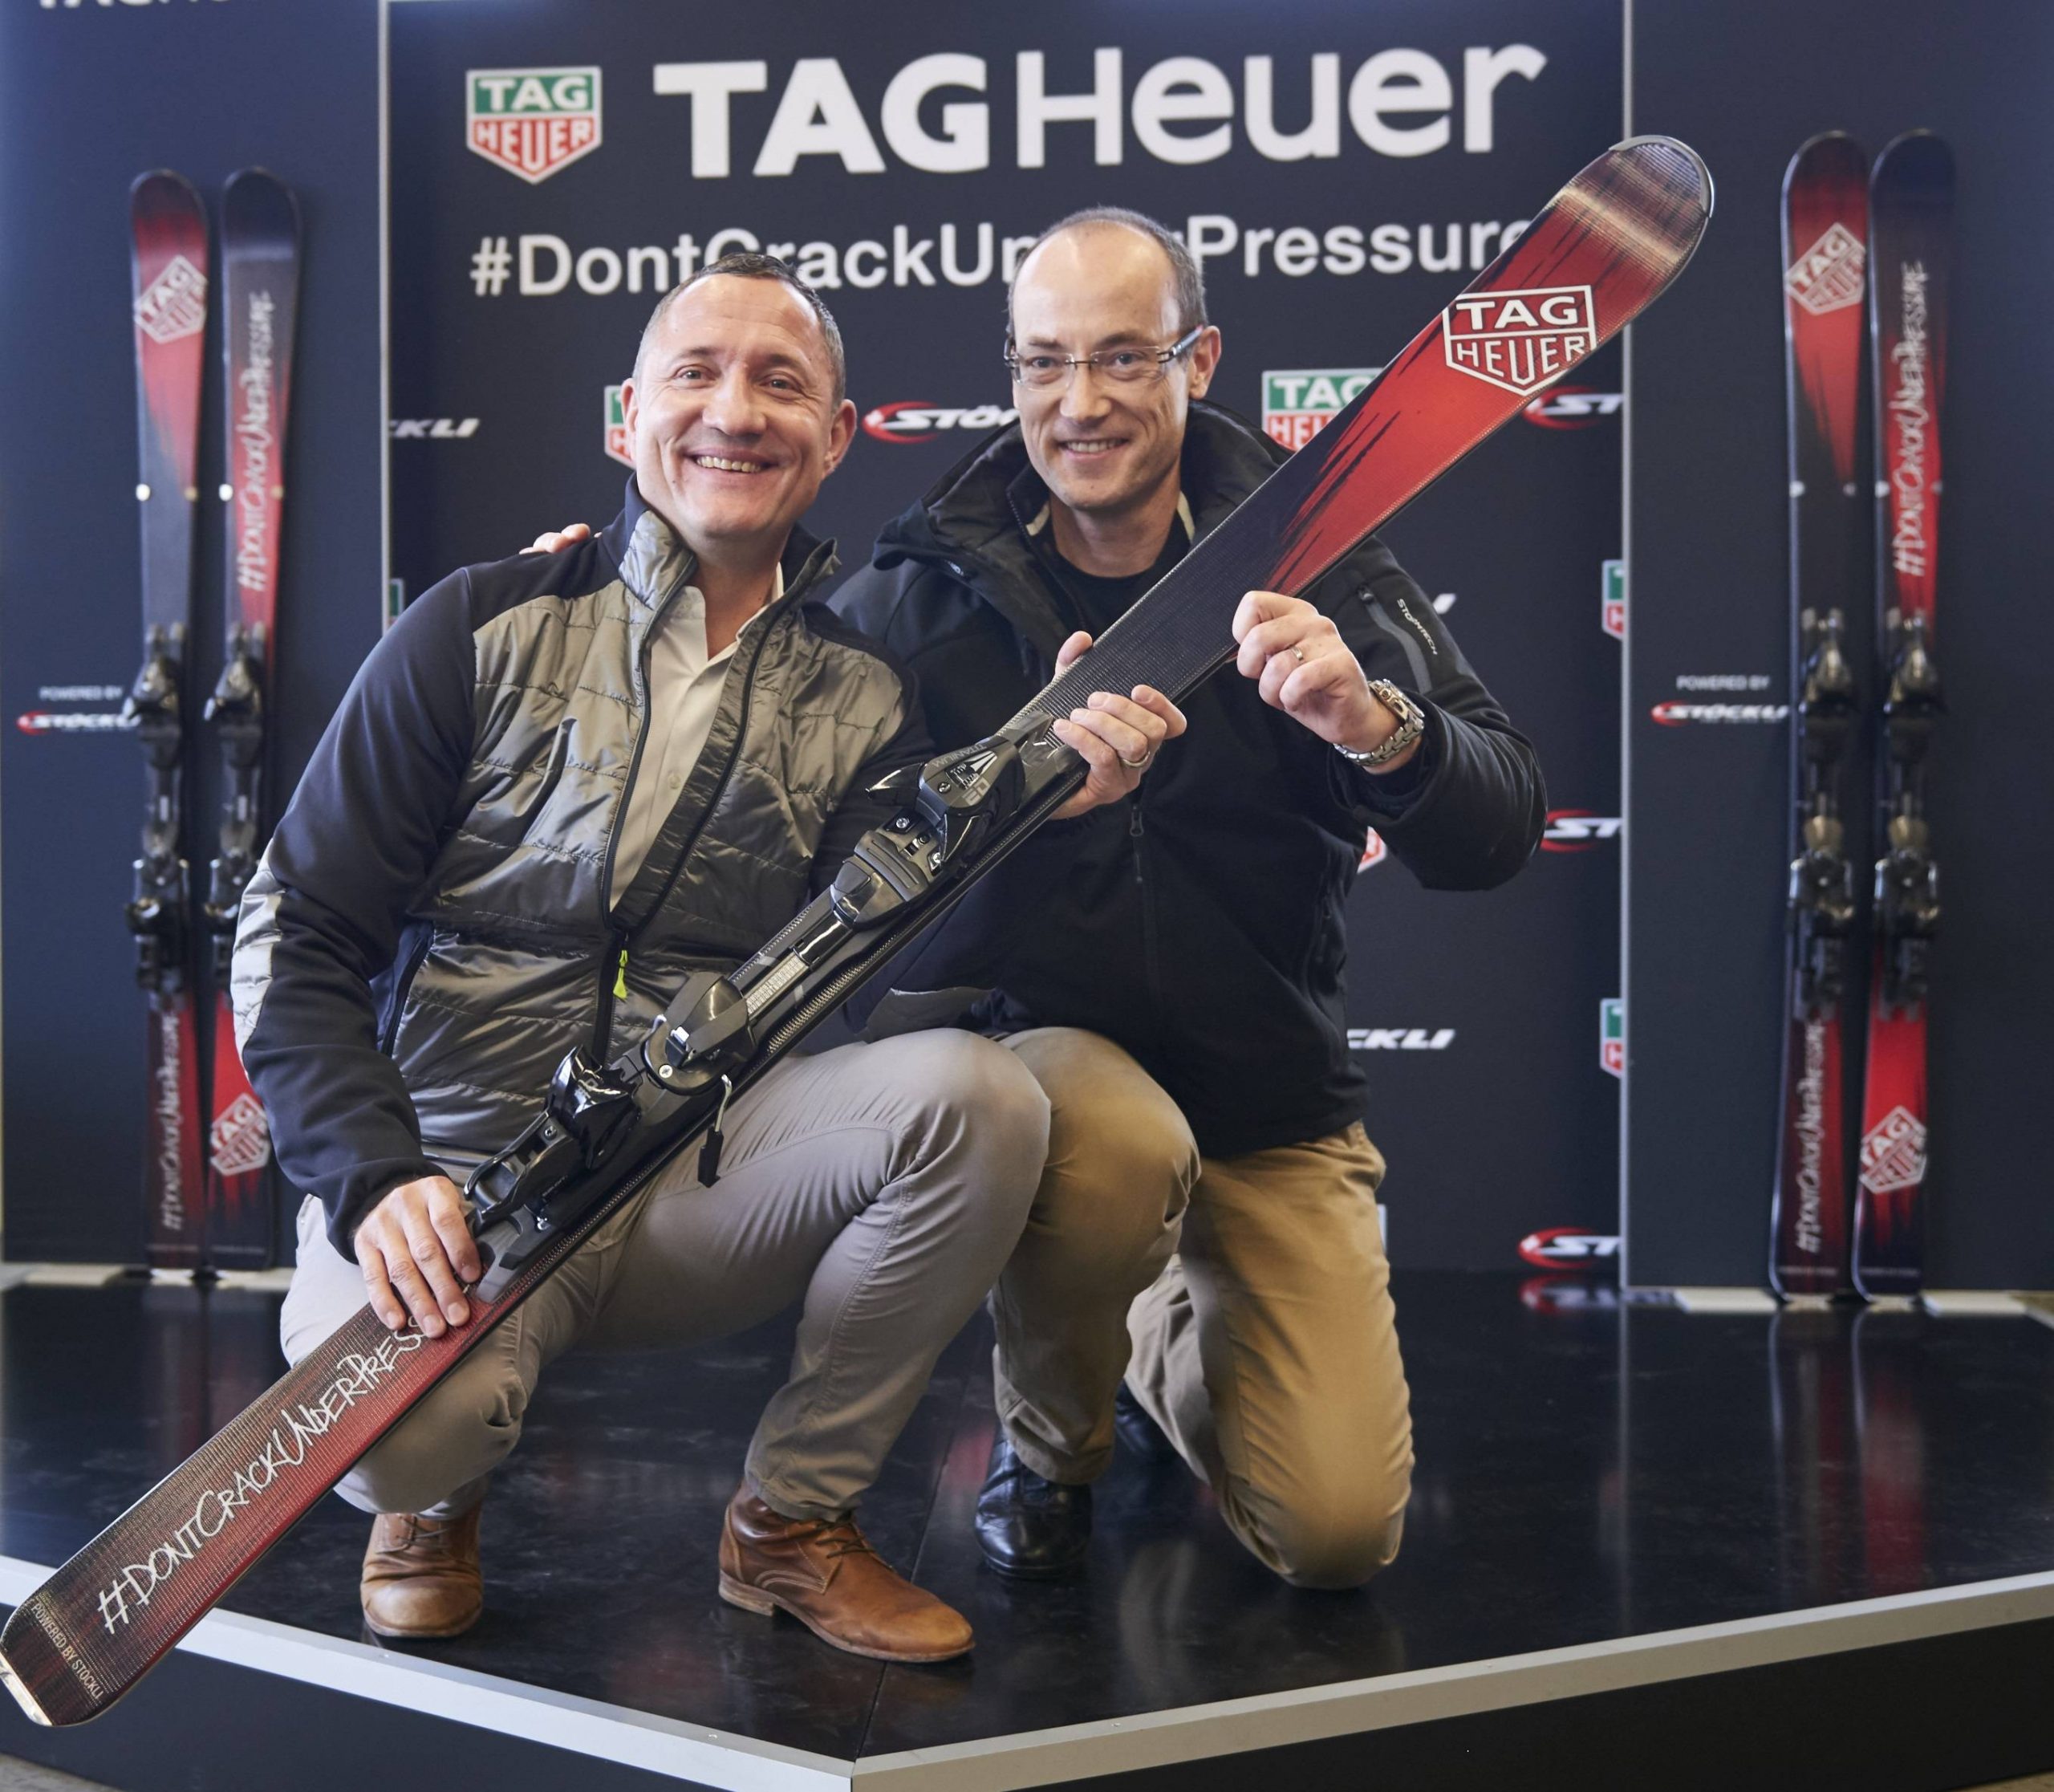 24 Gift Ideas For The Holiday Season: TAG Heuer Skis